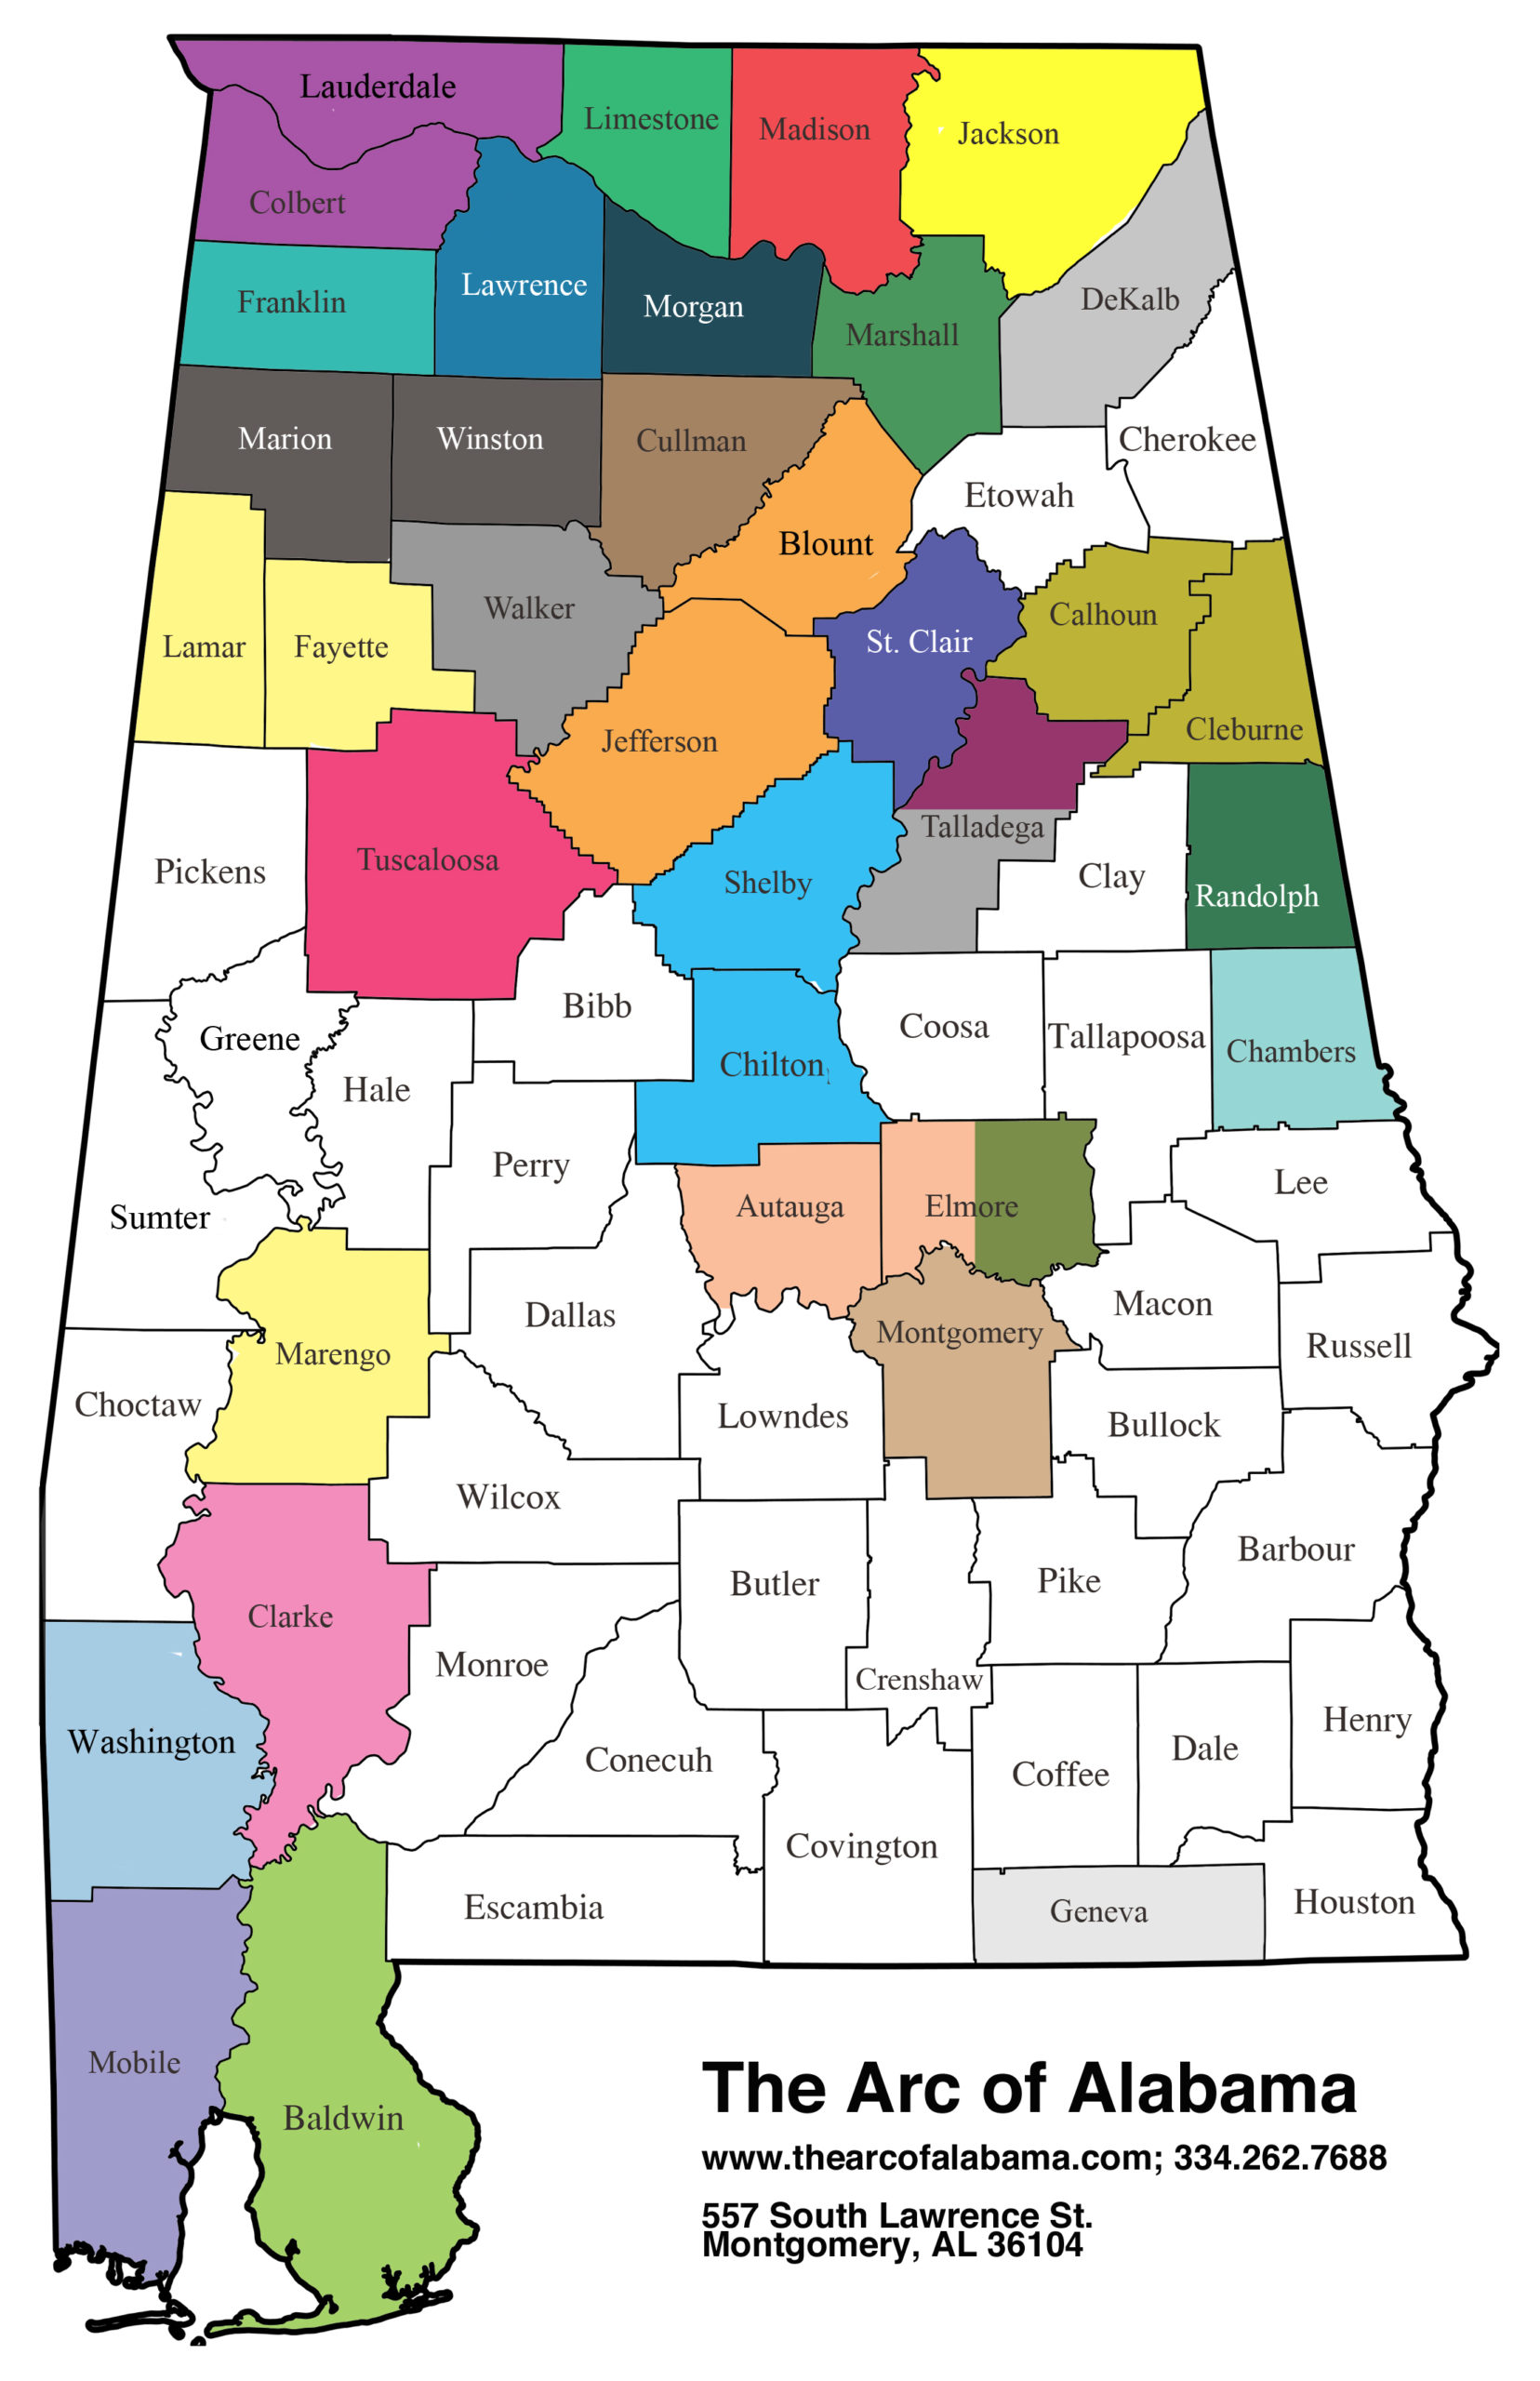 Alabama state map showing counties where Arc chapters are present